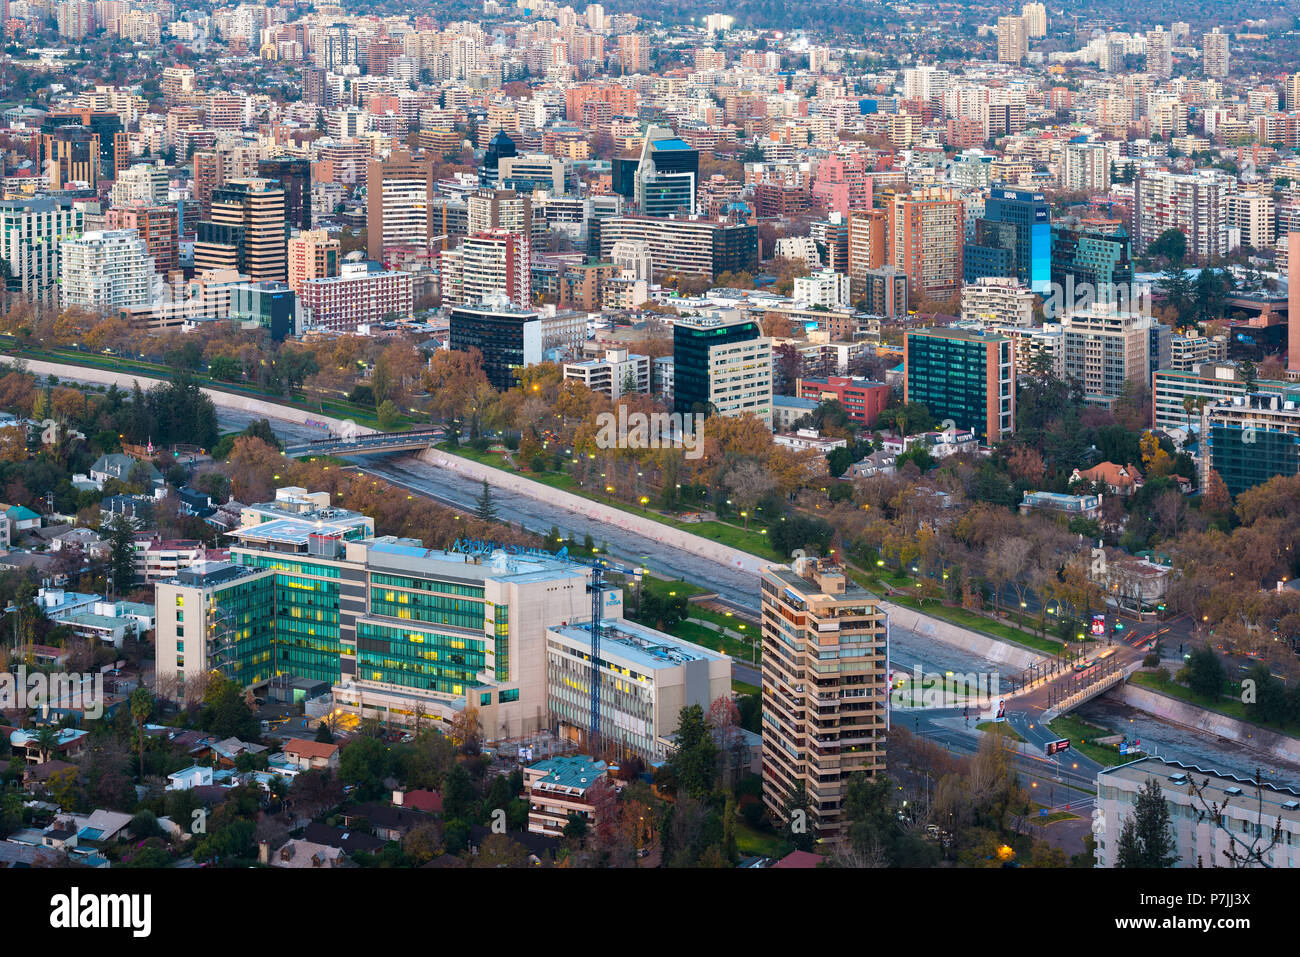 Santiago, Metropolitan Region, Chile - Panoramic view of Providencia district with Mapocho River and the snowed Andes mountain range in Stock Photo